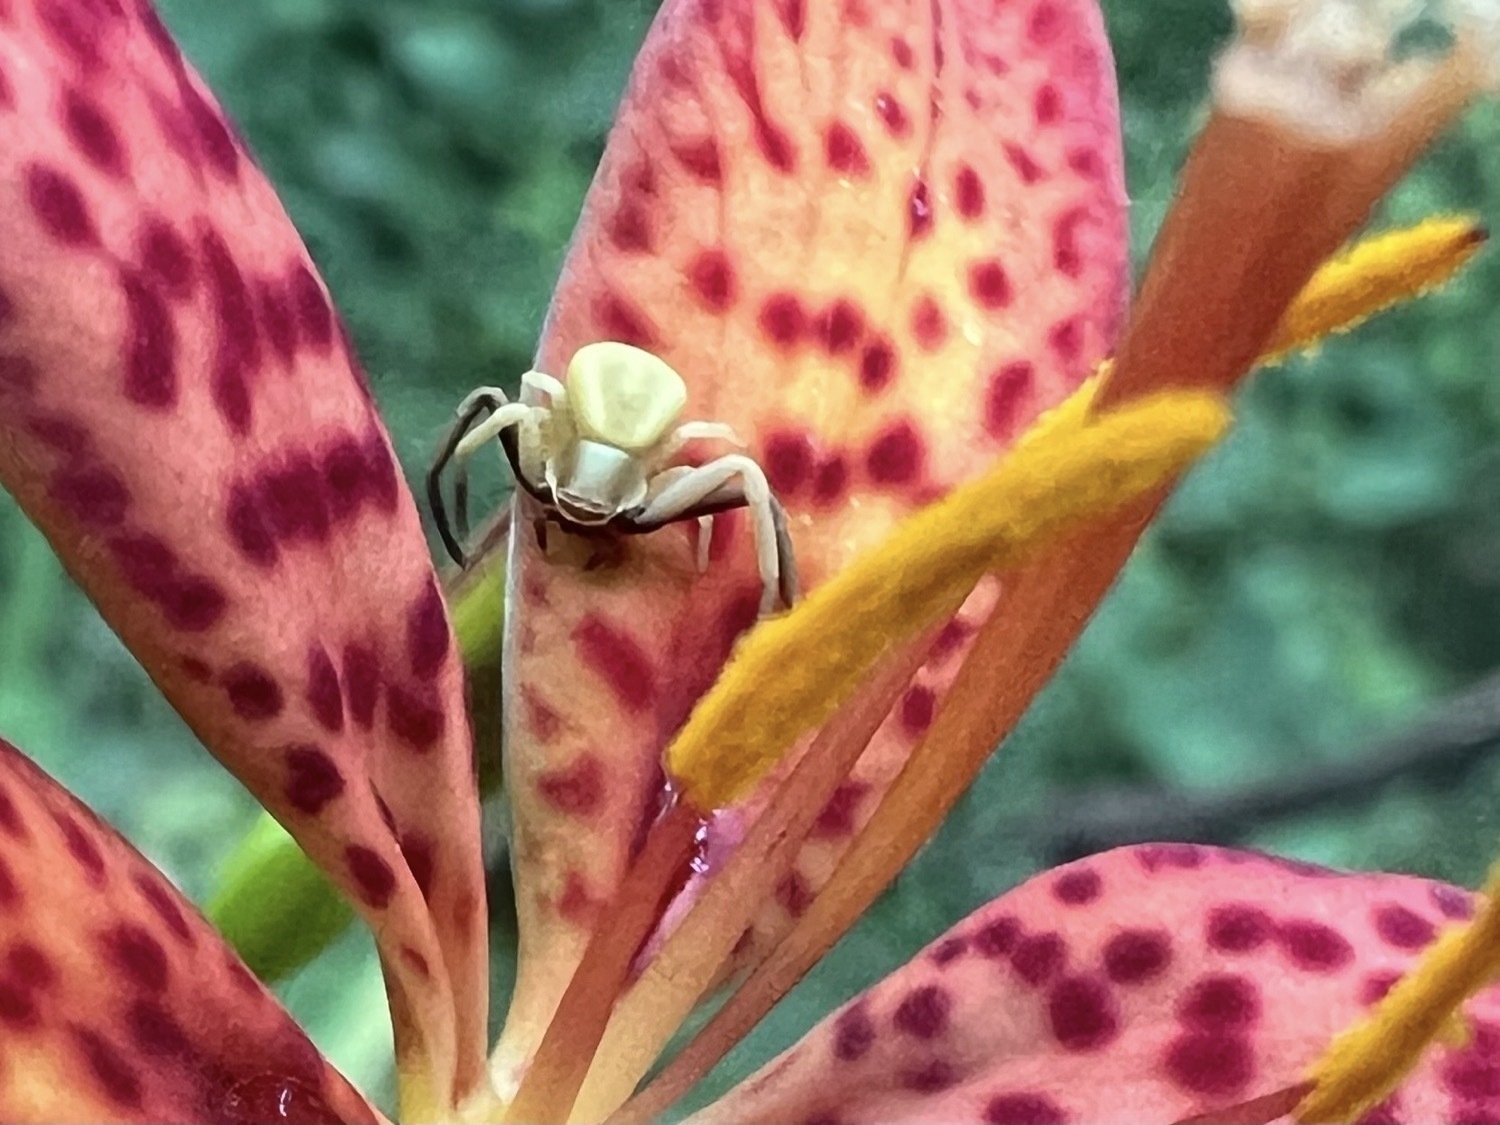 A peach colored flower with dark red spots covering its six elongated petals. There are three pollen covered yellow anthers rising from the center of the flower. The background is blurred dark green forest. A tiny pale yellow spider is sitting on one of the petals.